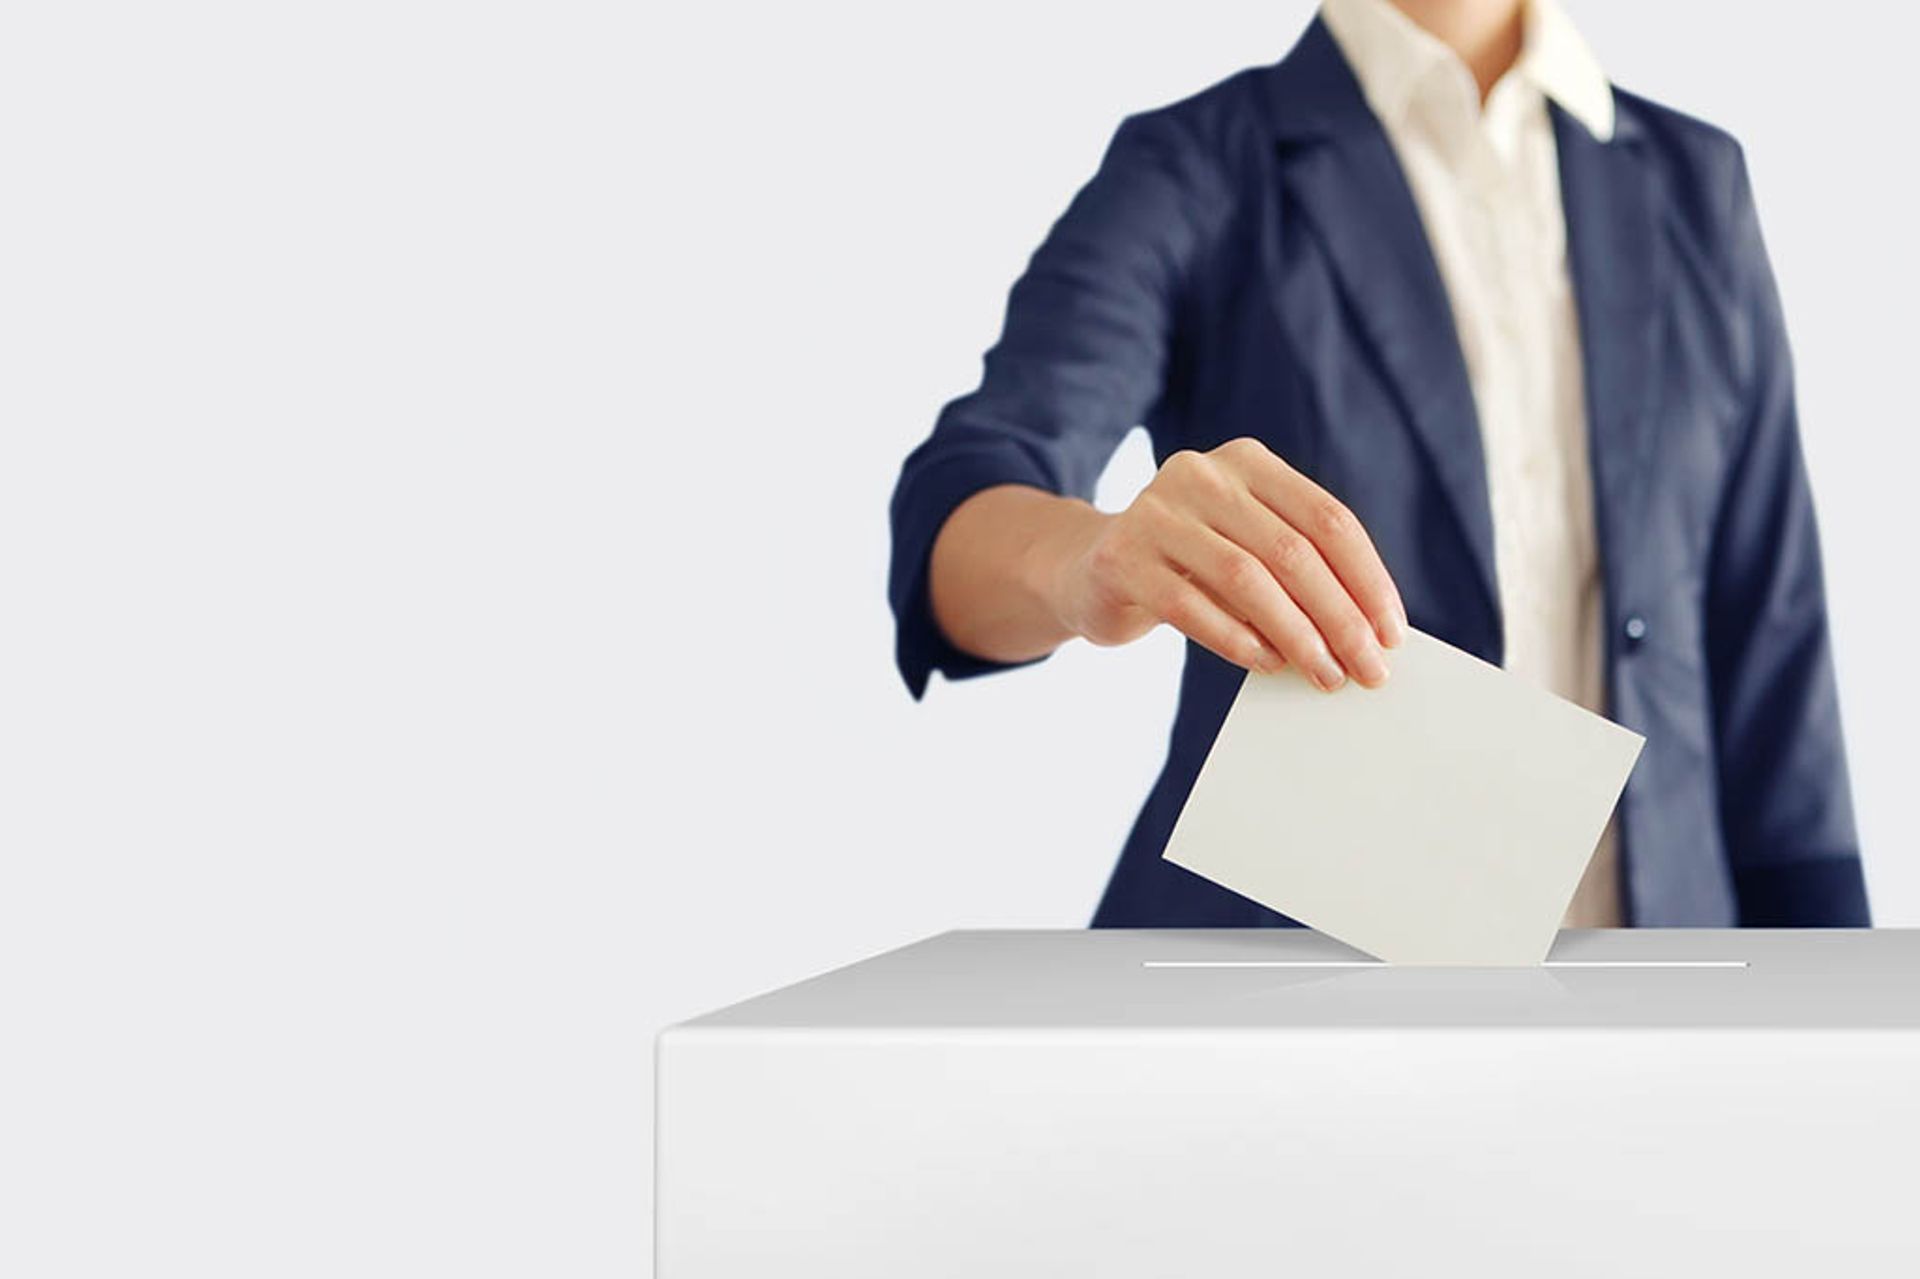 Image of a man casting a vote in a ballot box